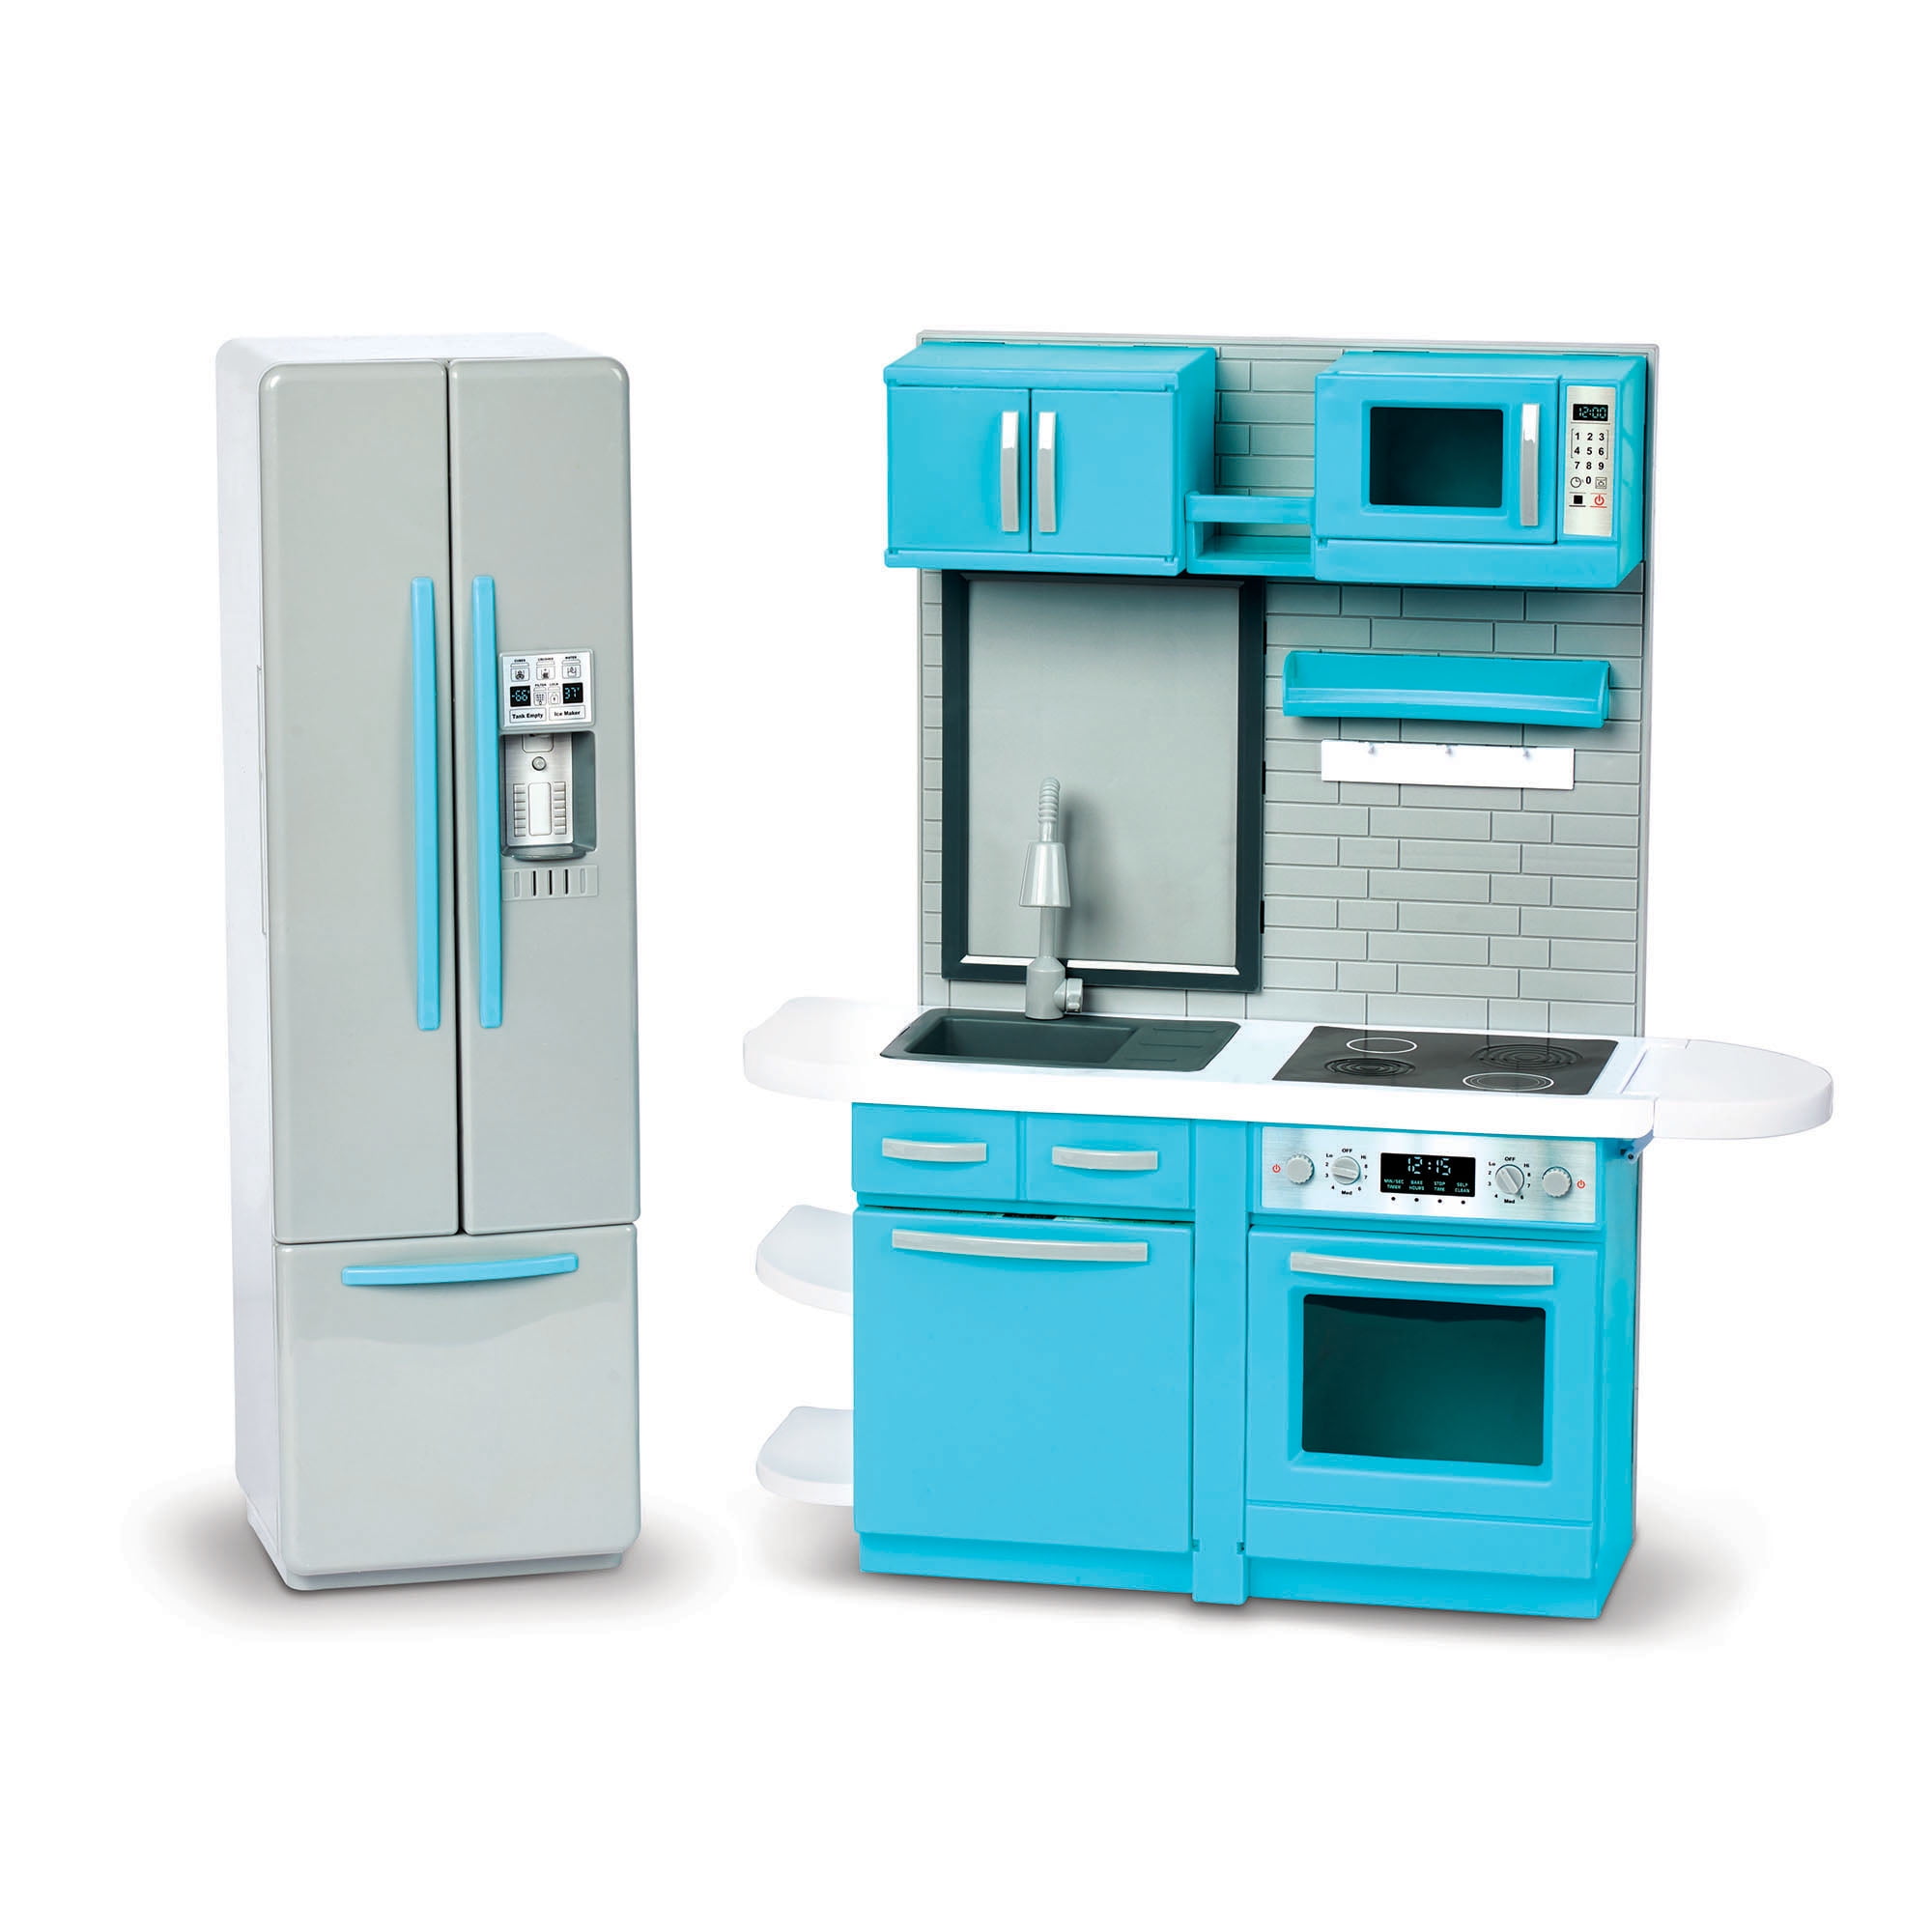 My Life As Kitchen Play Set For 18 Poseable Dolls Fridge, Stove